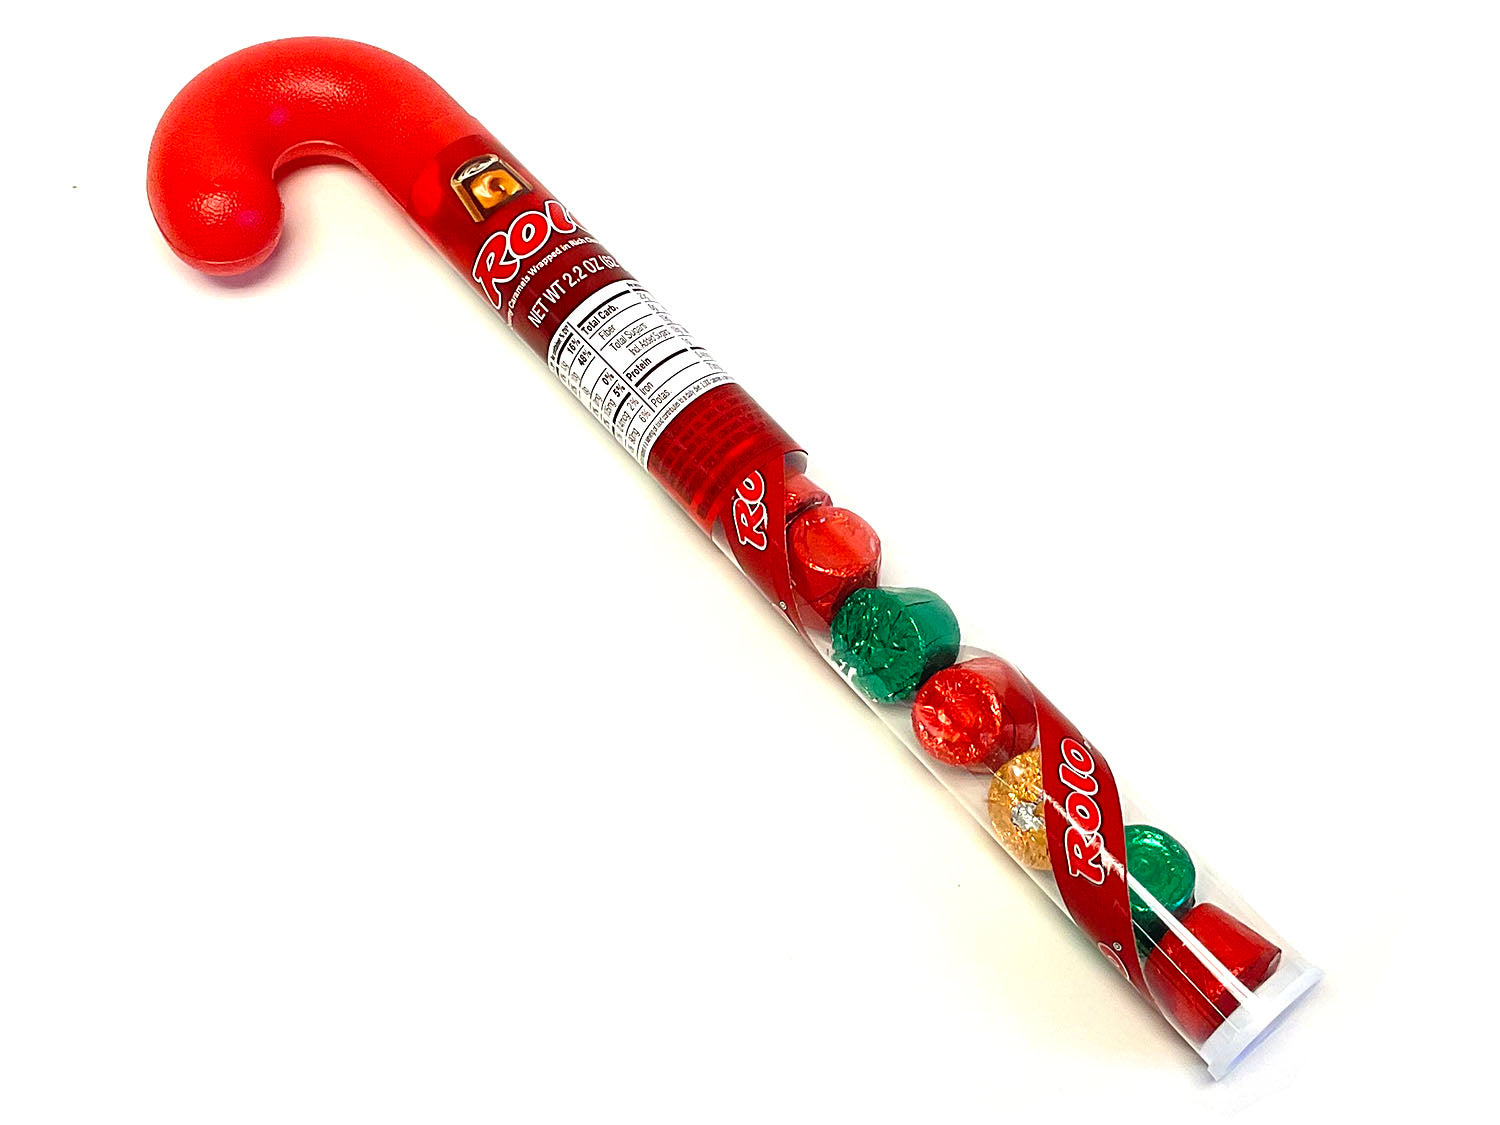 Candy Cane filled with Rolo - 2.2 oz 12 inch